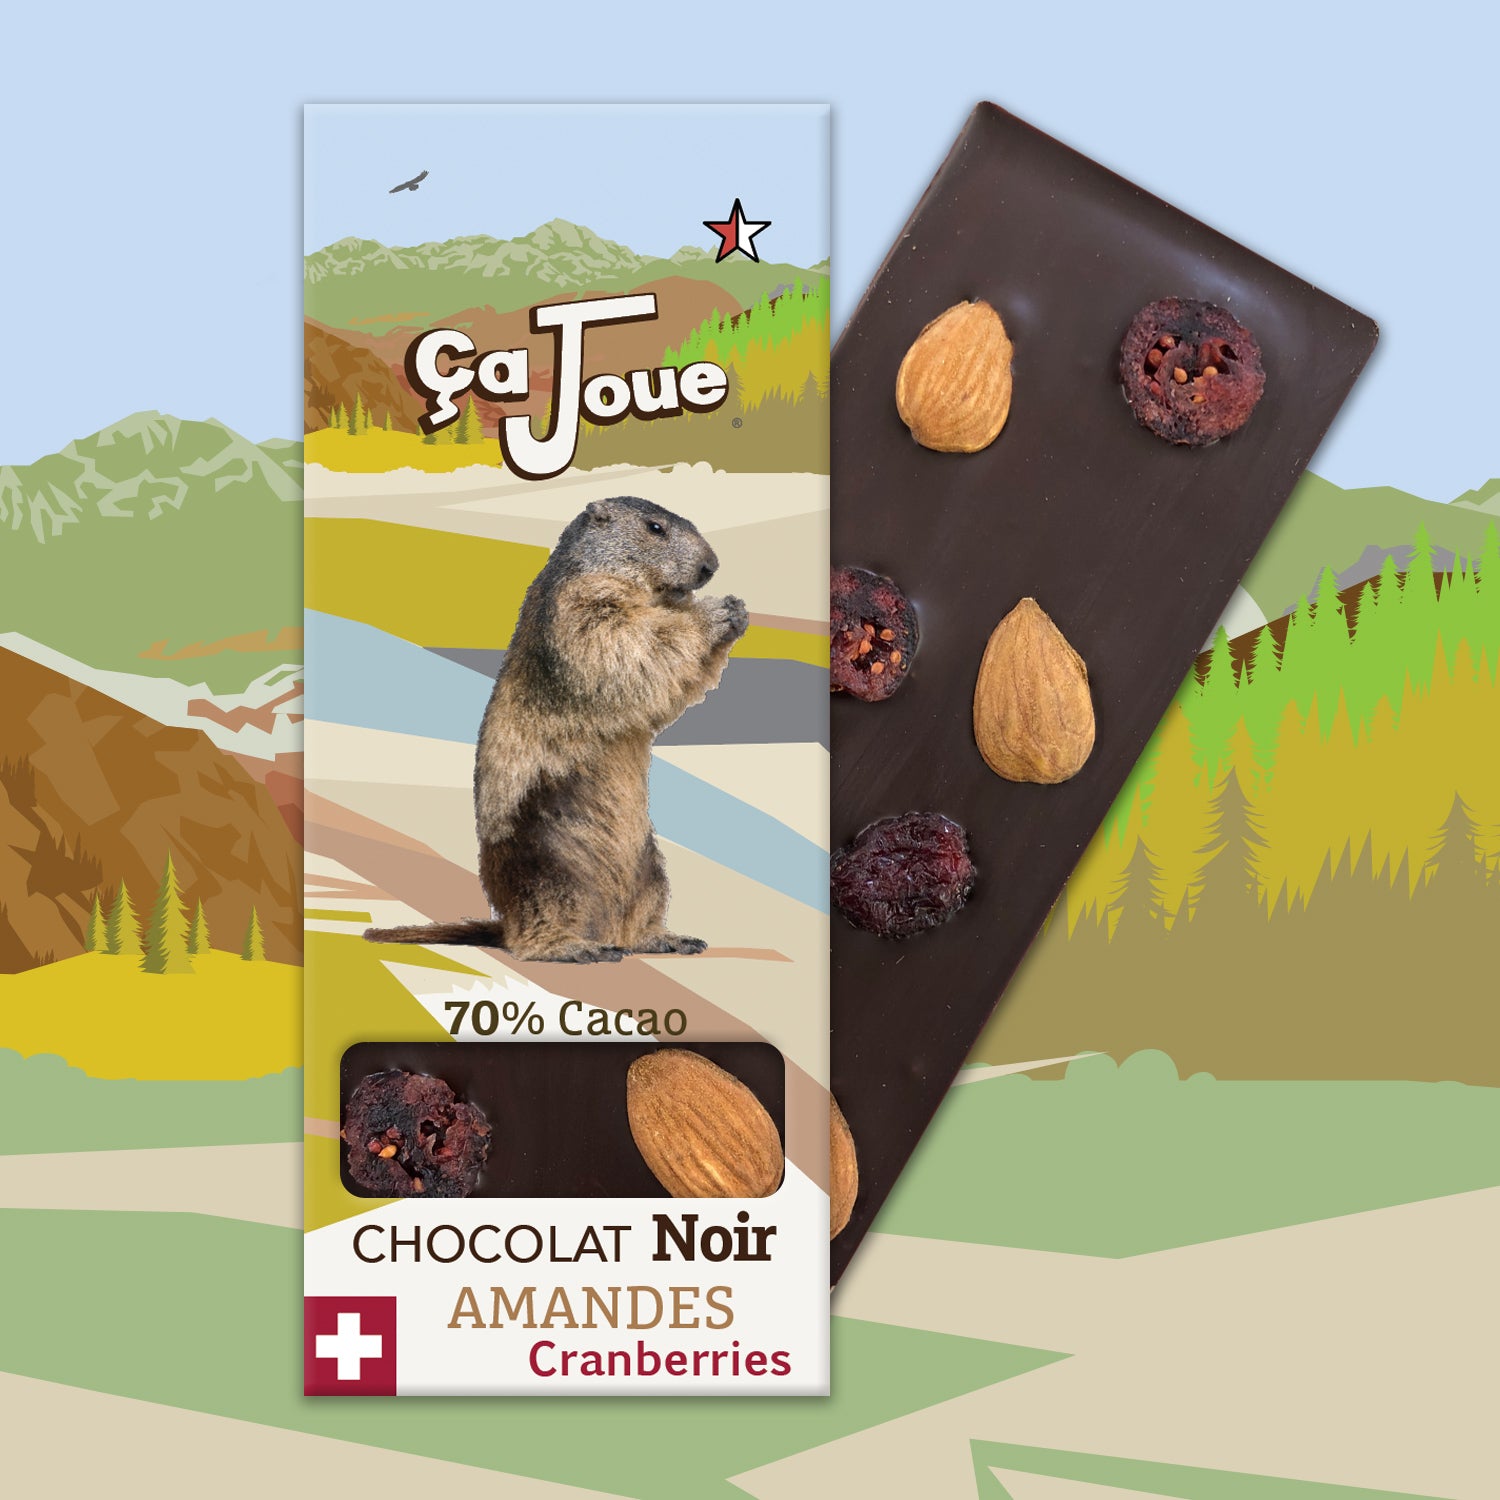 Ça Joue for the Marmots (Ref-BN5) Chocolate from Val de Bagnes